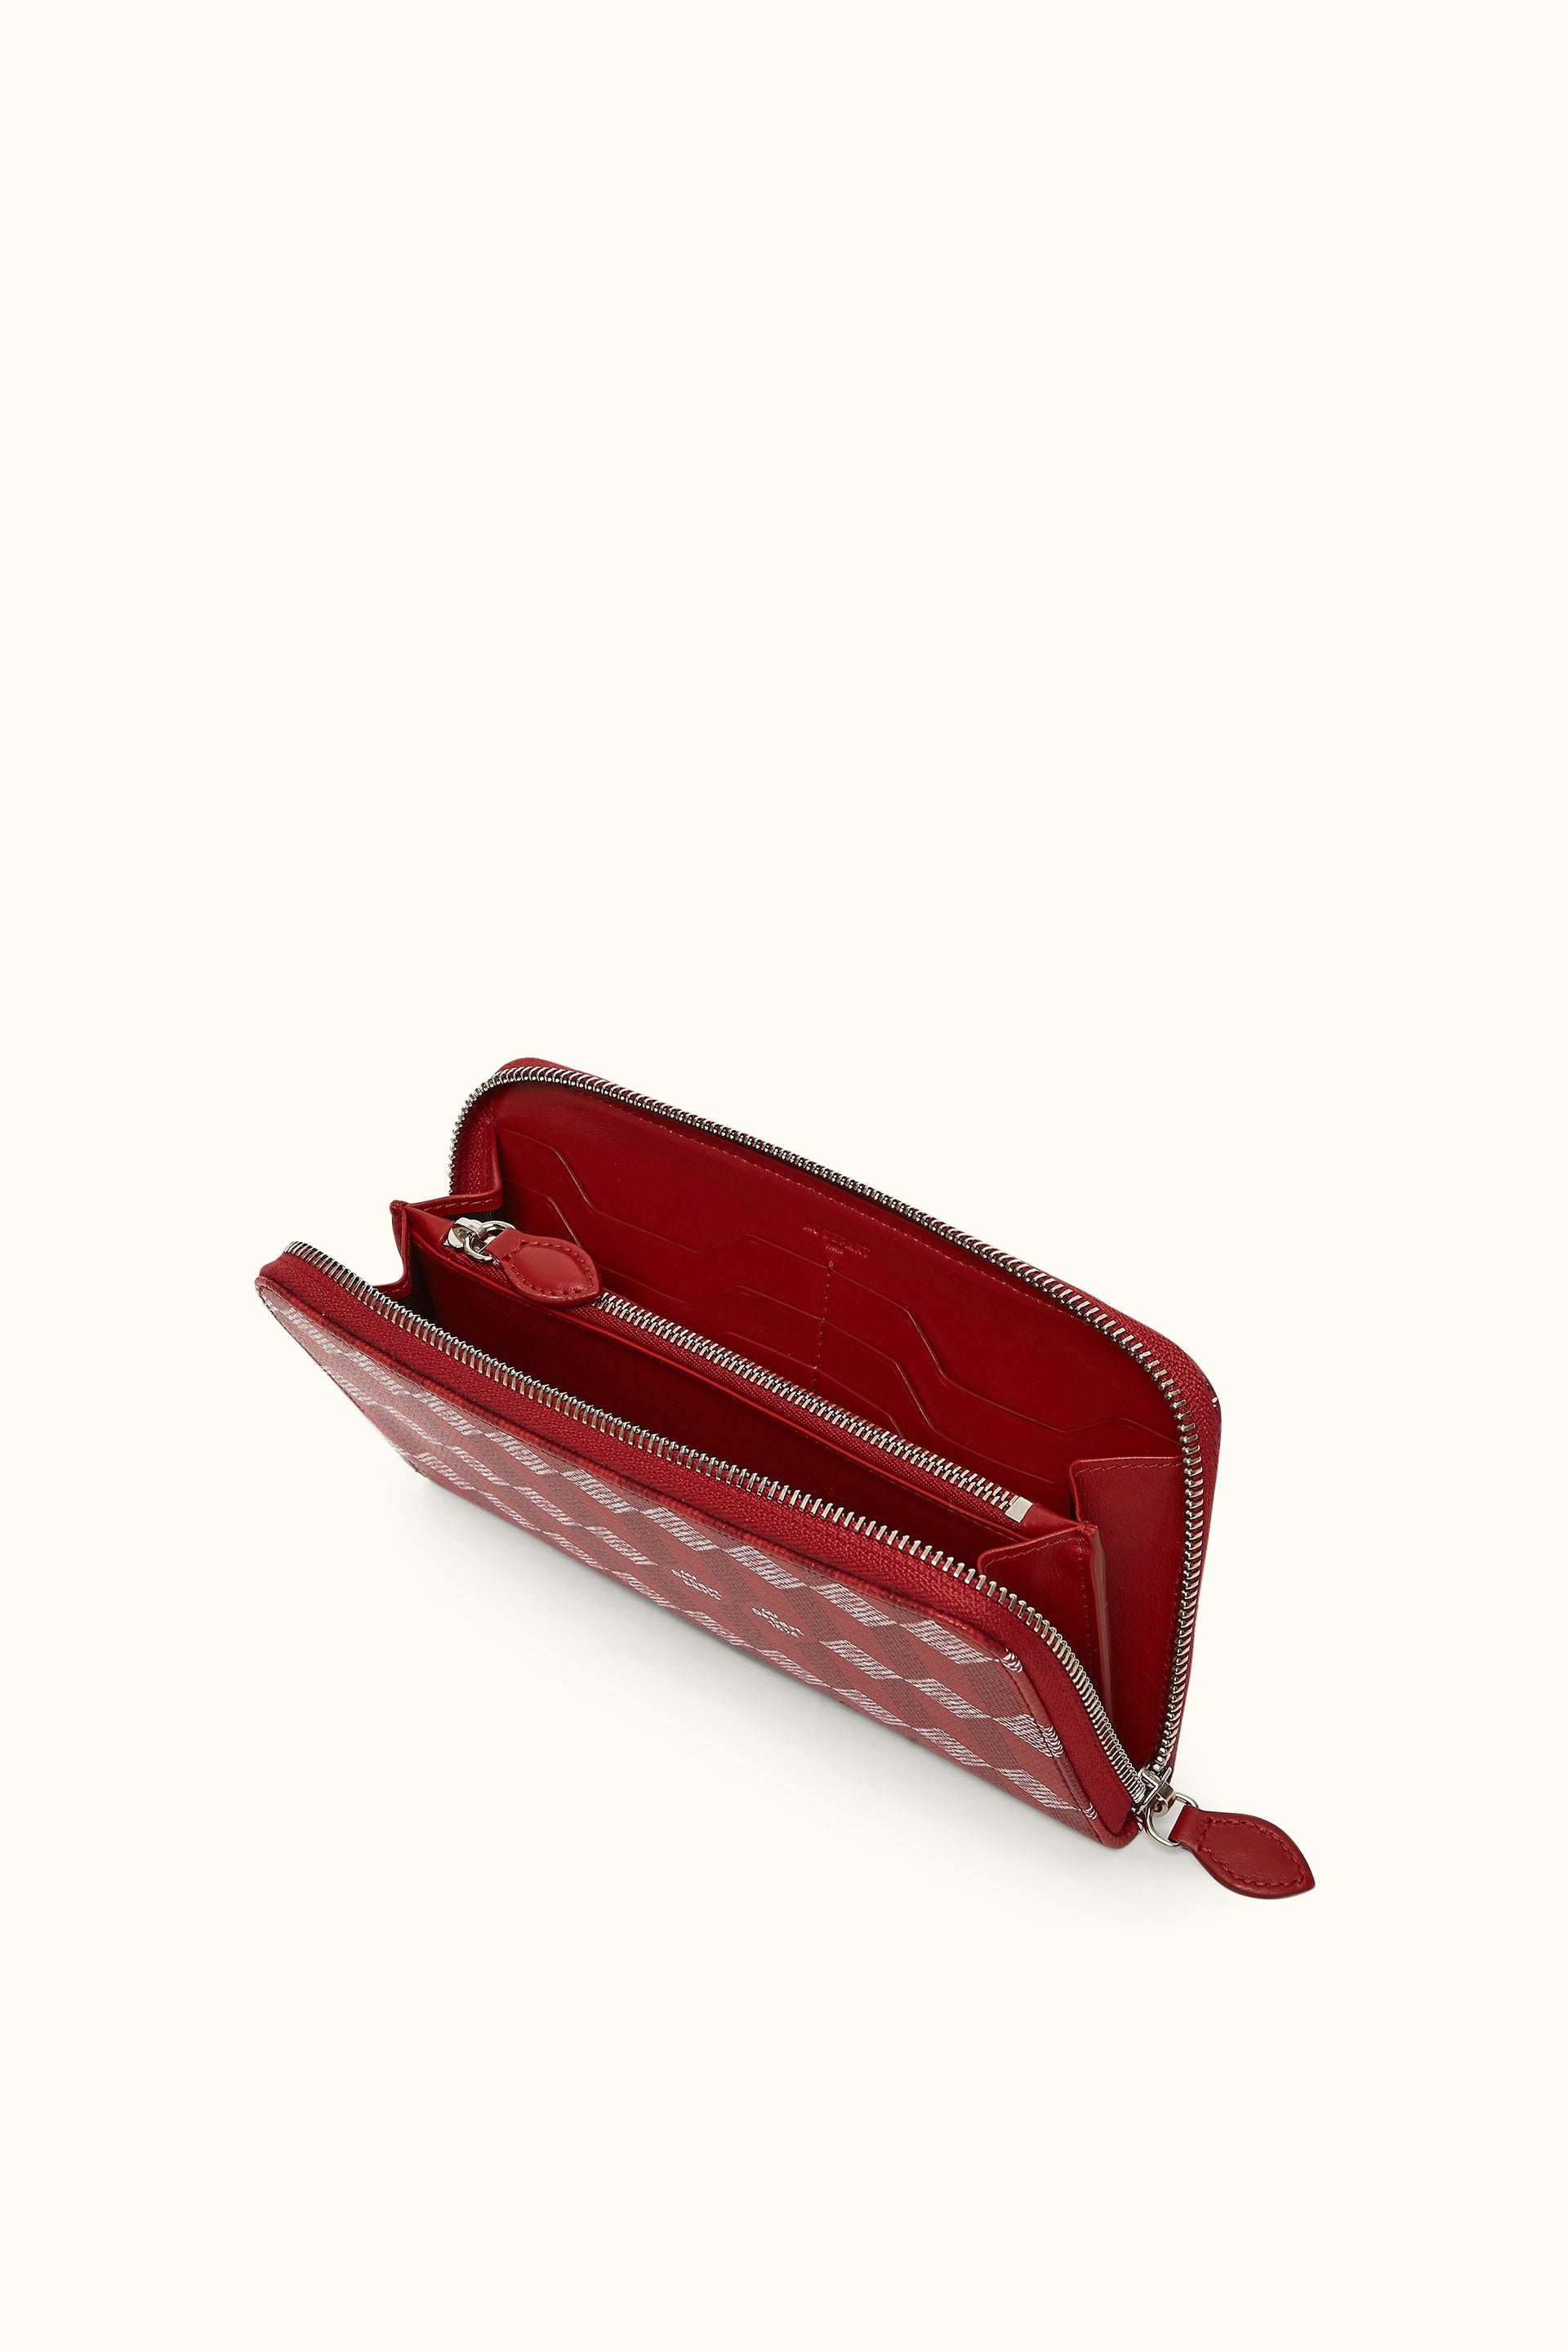 Le Portefeuille- Fermeture a Glissiere Coated Canvas Red